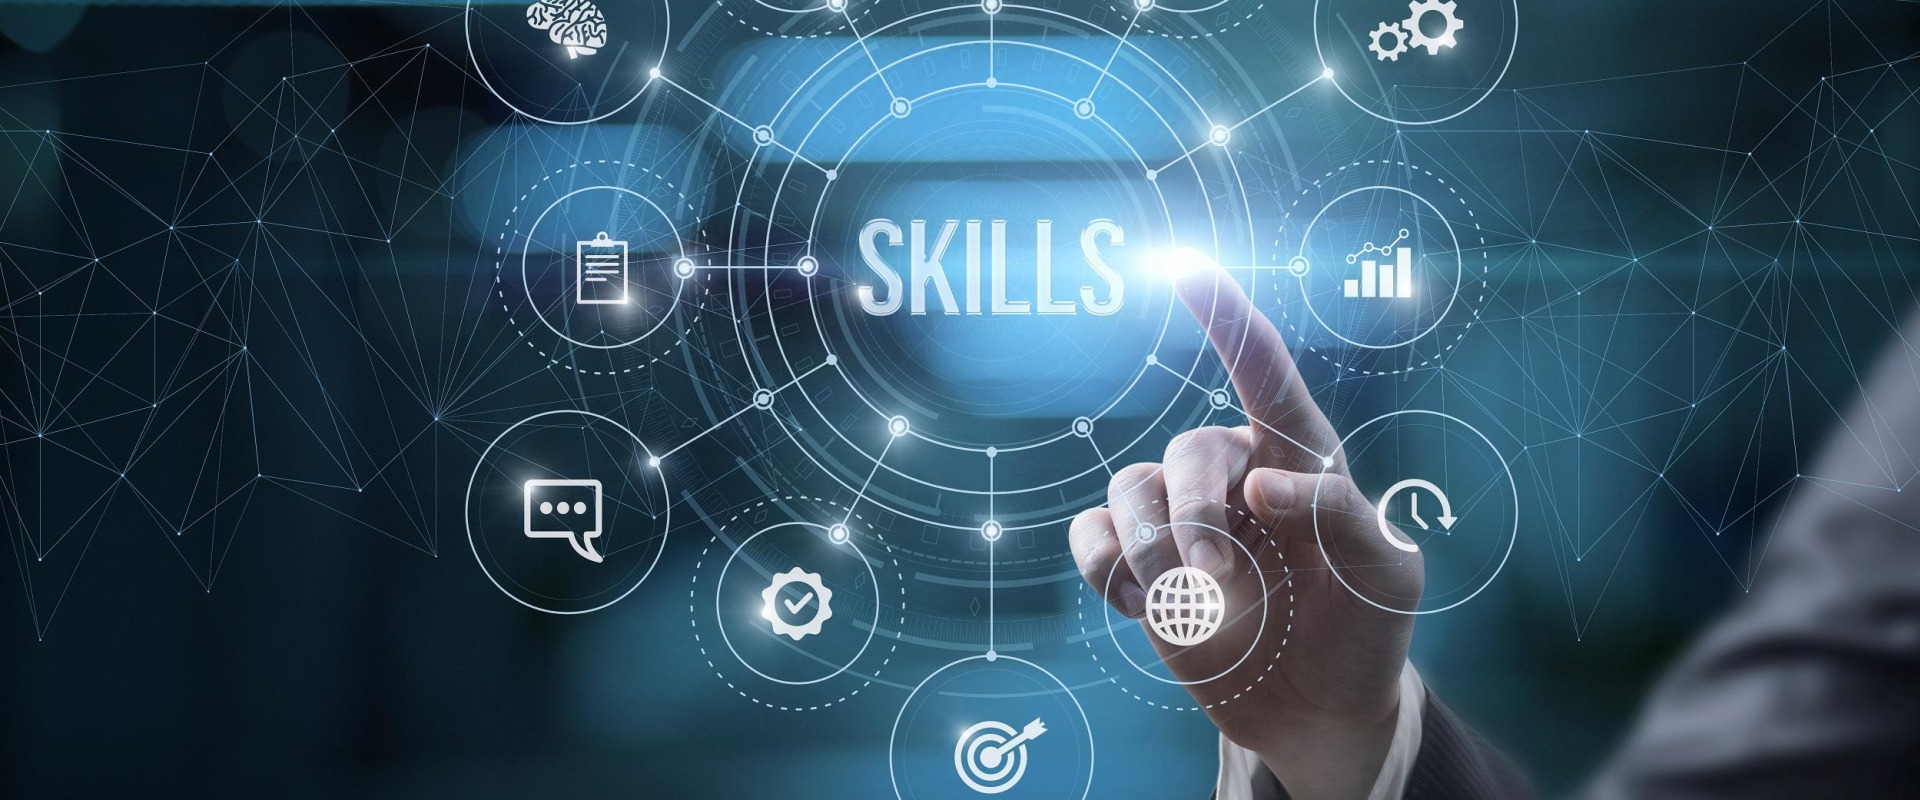 What are the most important skills for personal development?